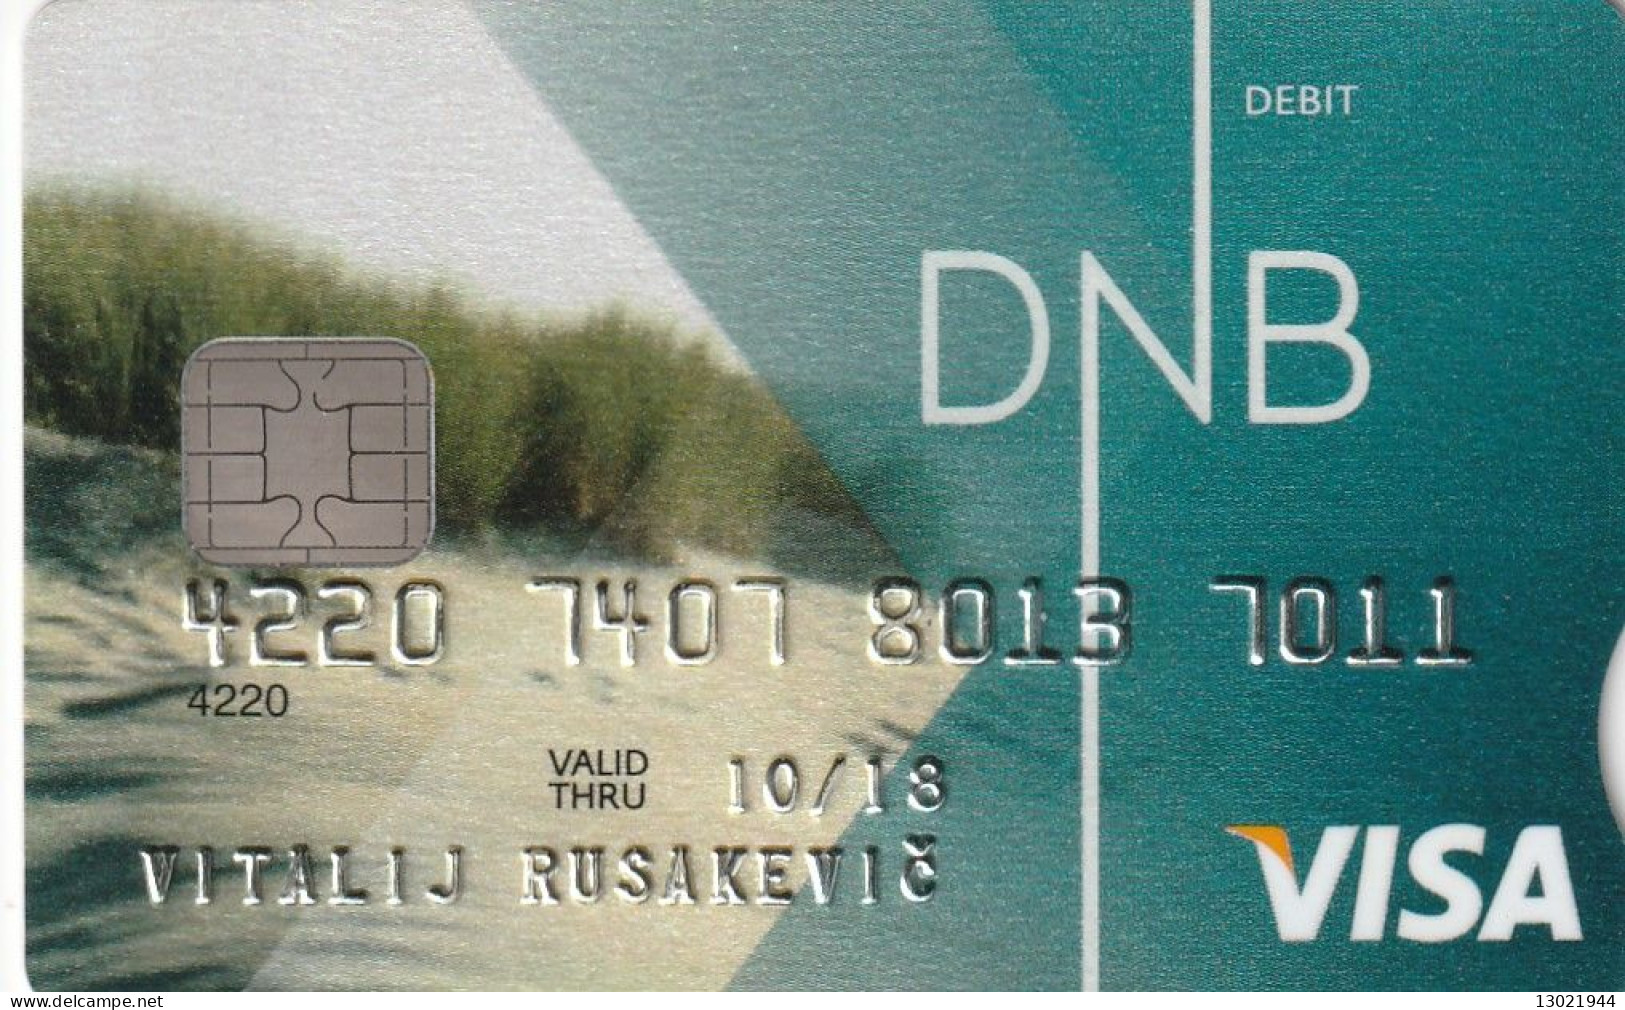 N. 4 LITUANIA BANK  CARD - POSSIBLE SALE OF SINGLE CARDS - Credit Cards (Exp. Date Min. 10 Years)